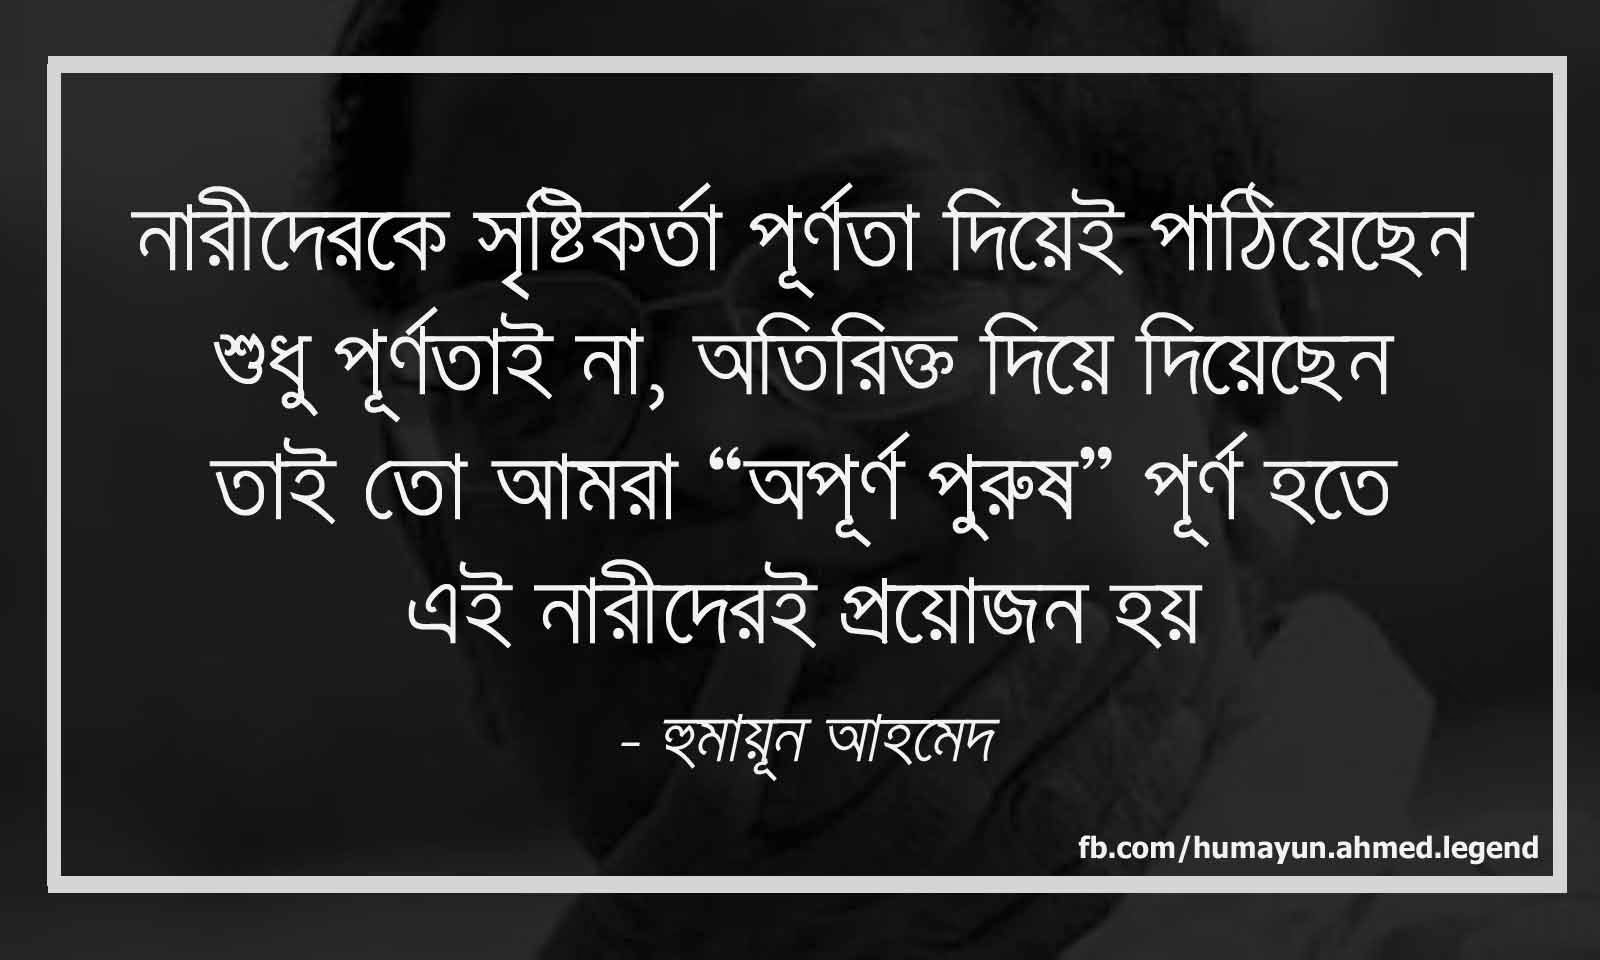 Humayun Ahmed s Quotes about Women